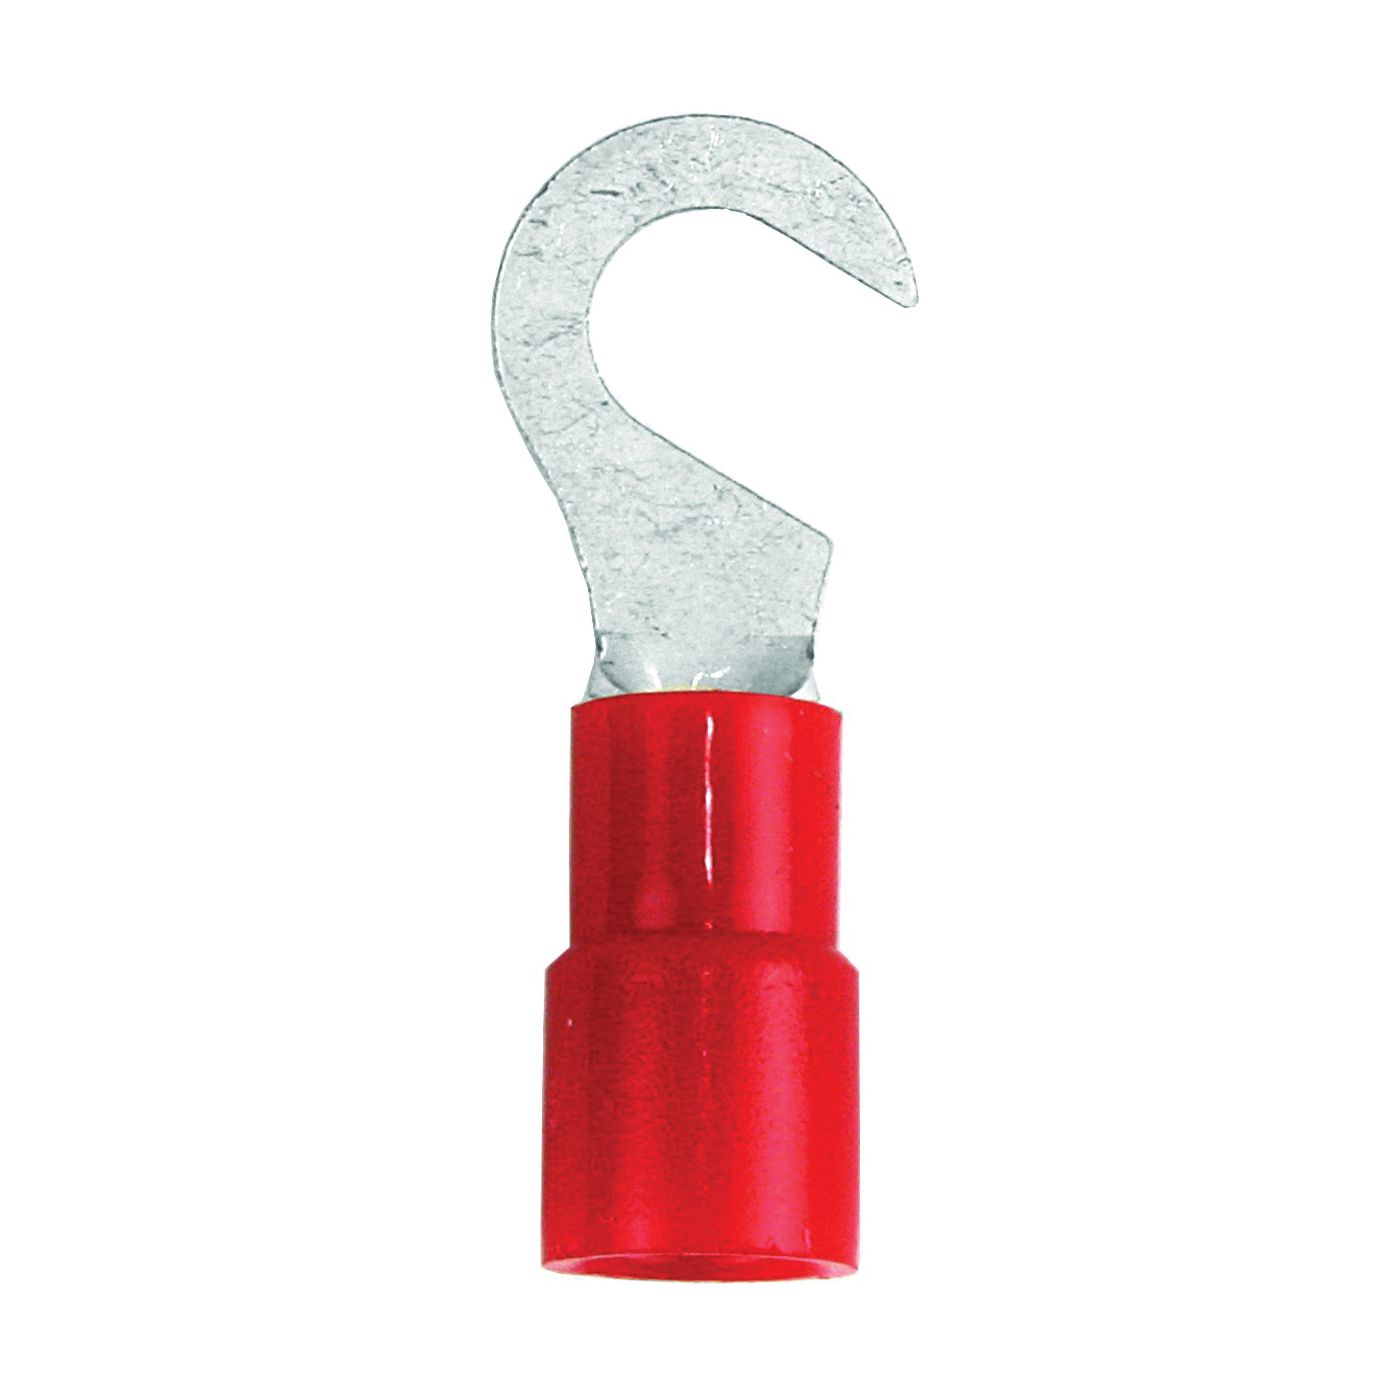 60958 Hook Terminal, 22 to 18 AWG Wire, #8 Stud, Vinyl Insulation, Red